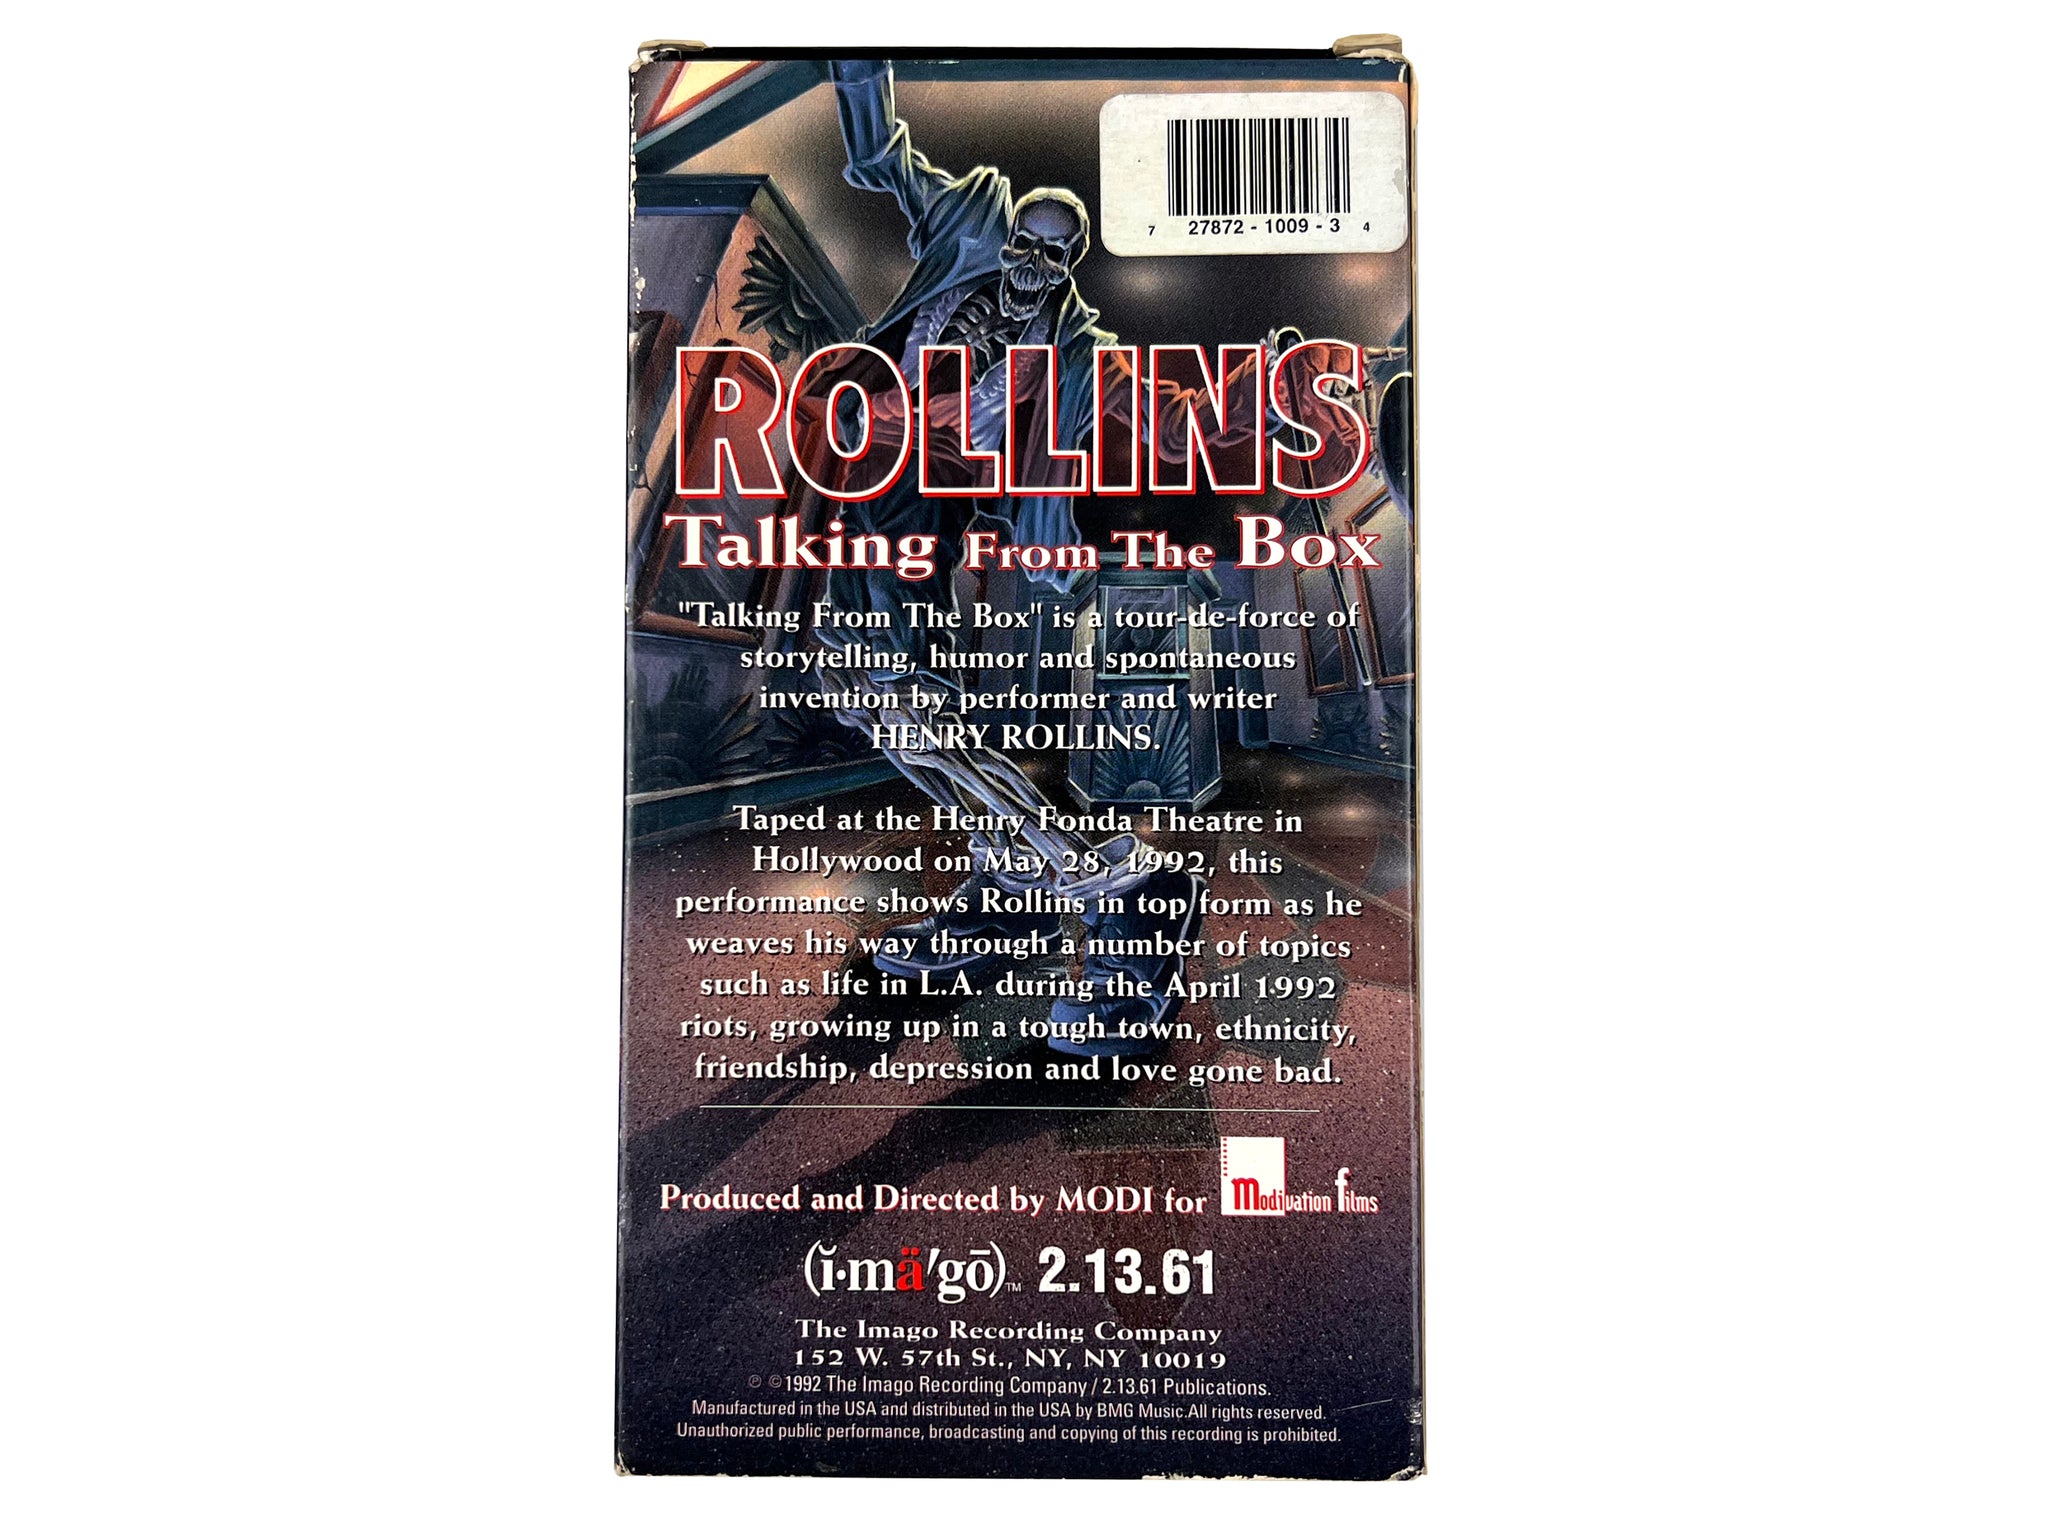 Henry Rollins 'Talking from the Box' VHS